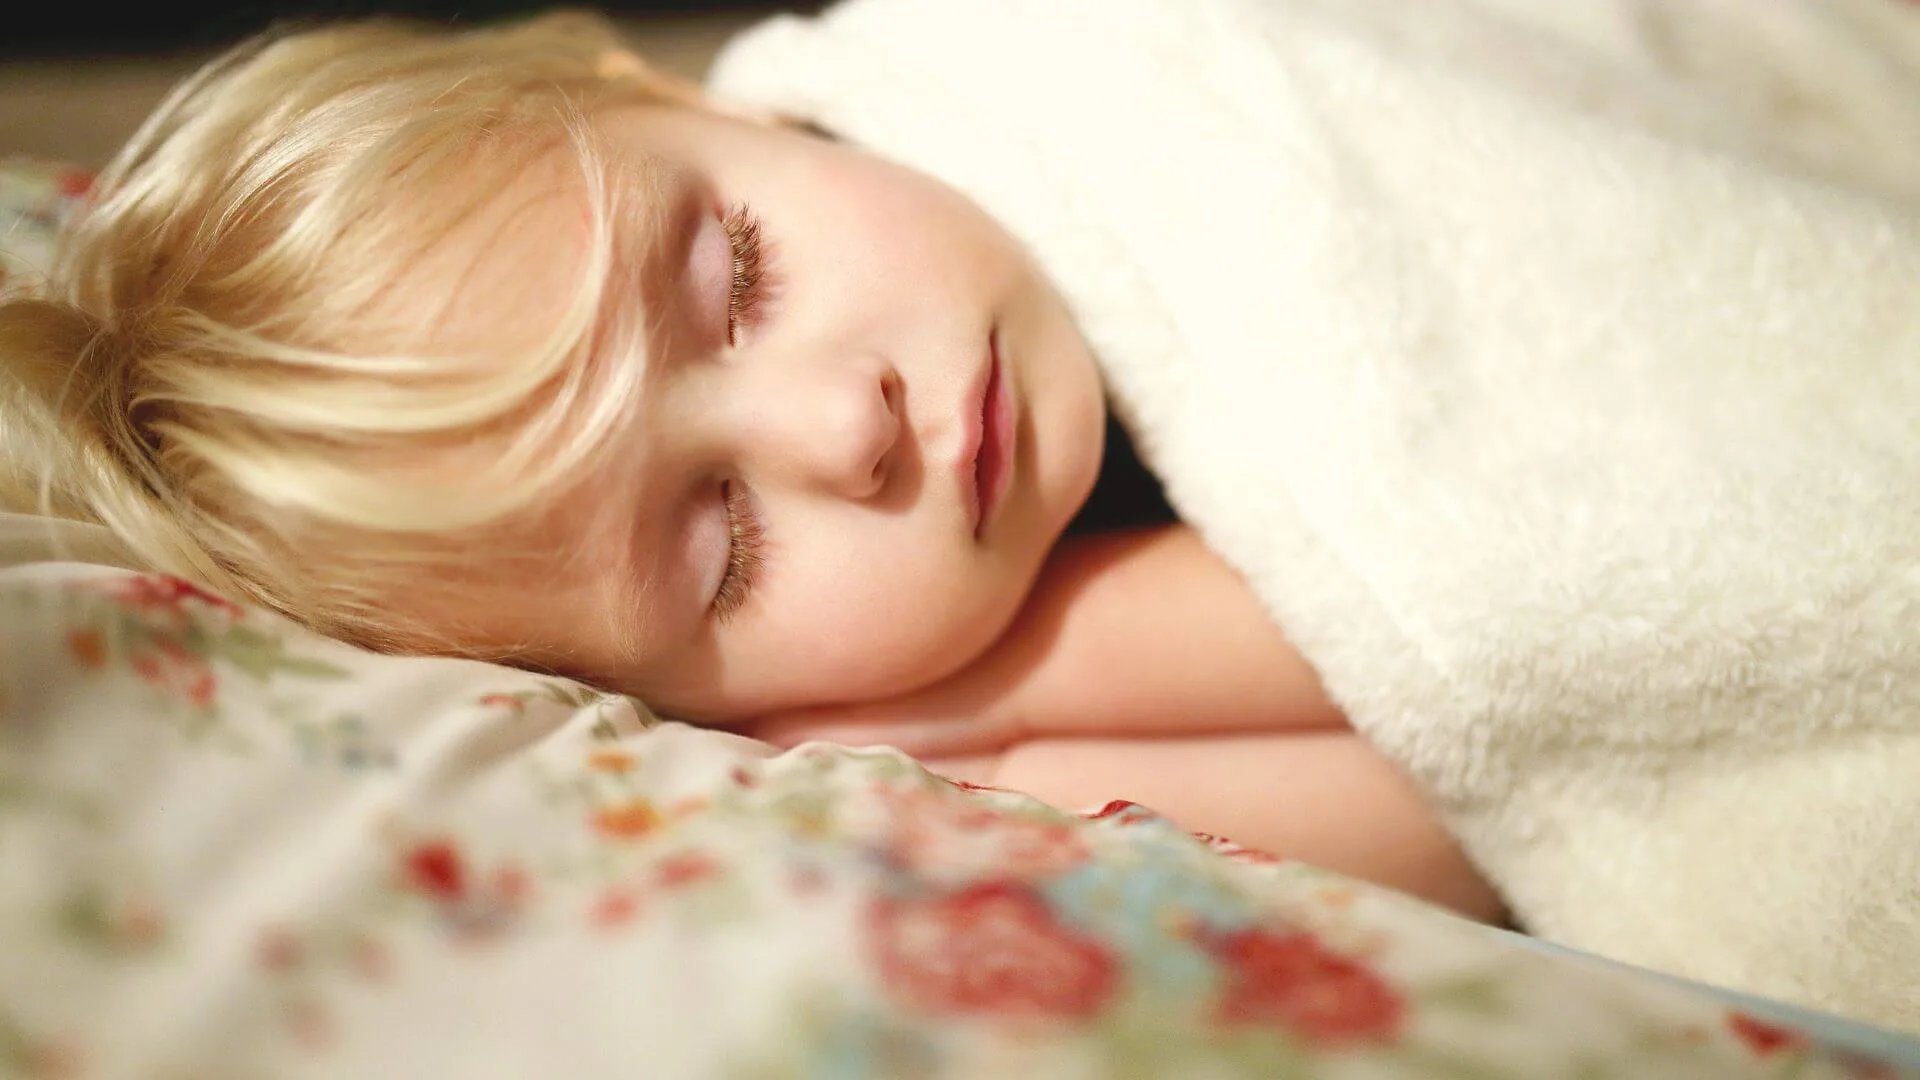 5 Steps to a Good Toddler Bedtime Routine